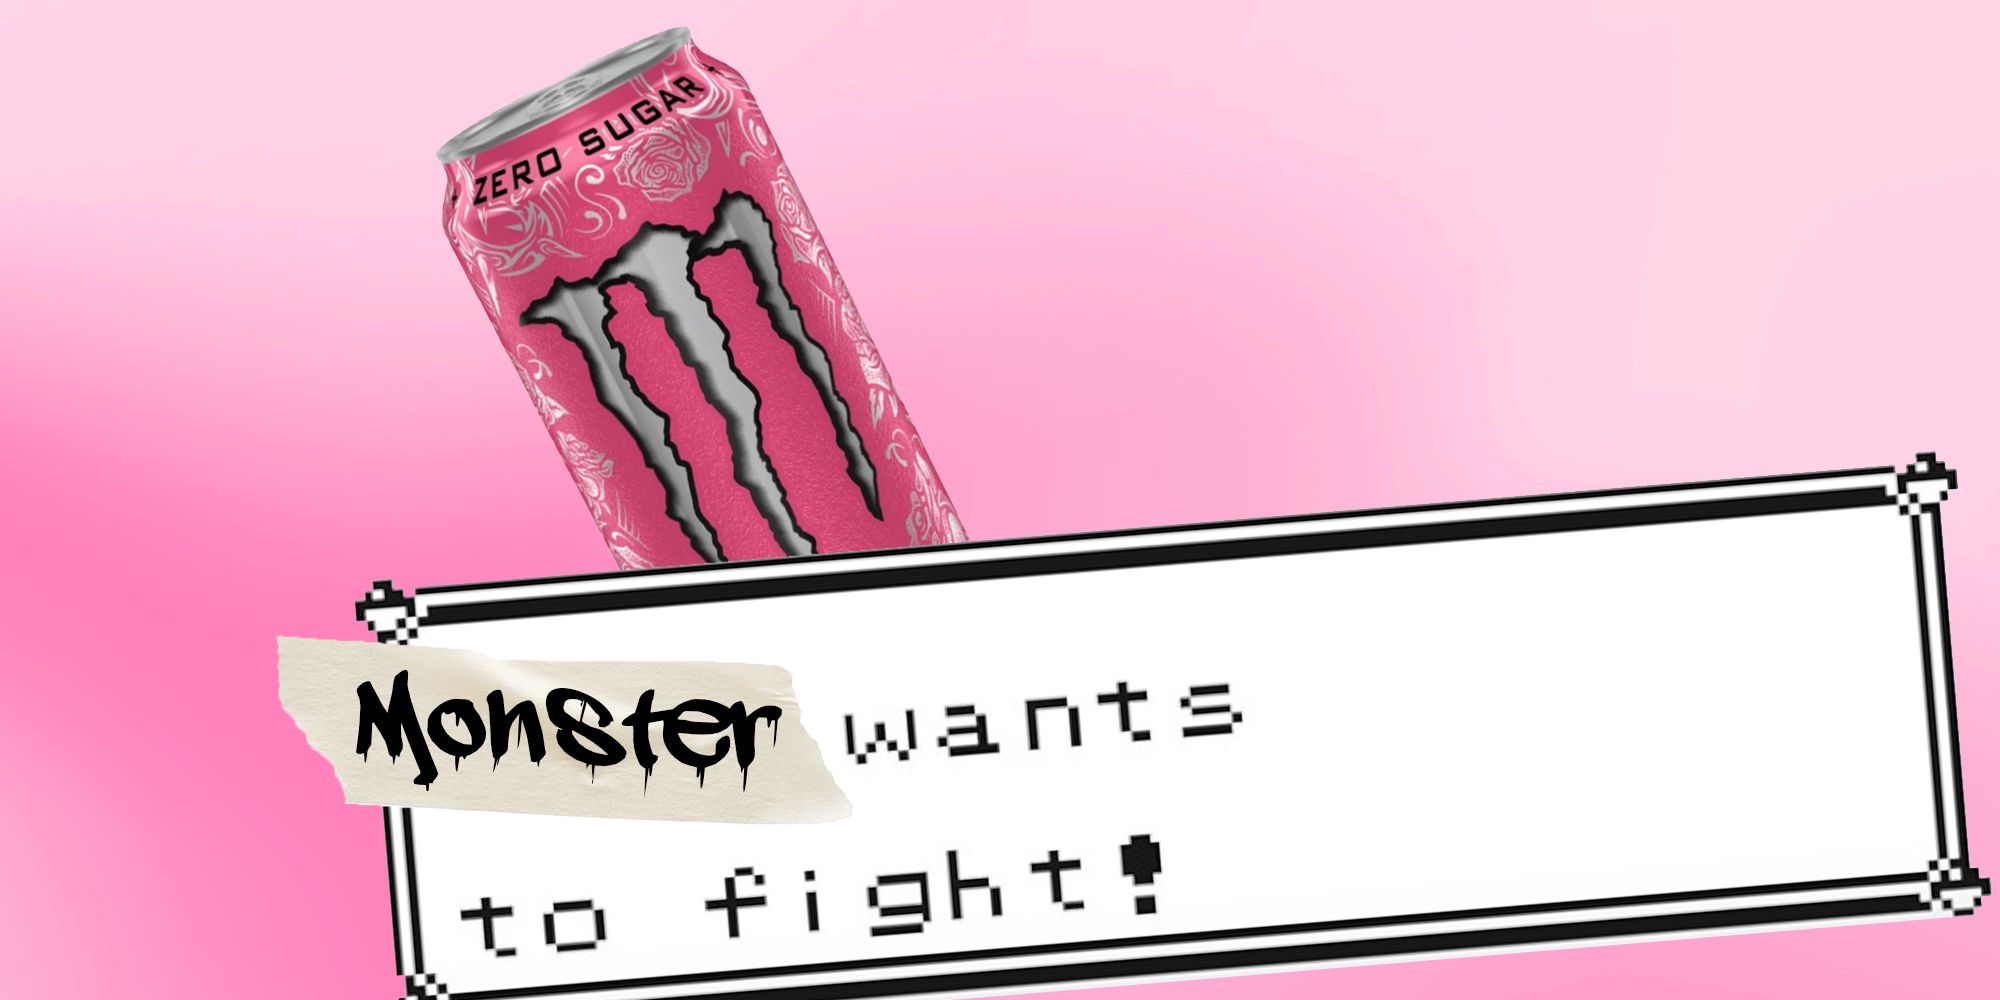 Monster Energy Ultra Rosa flavour over a pink background with Pokemon 